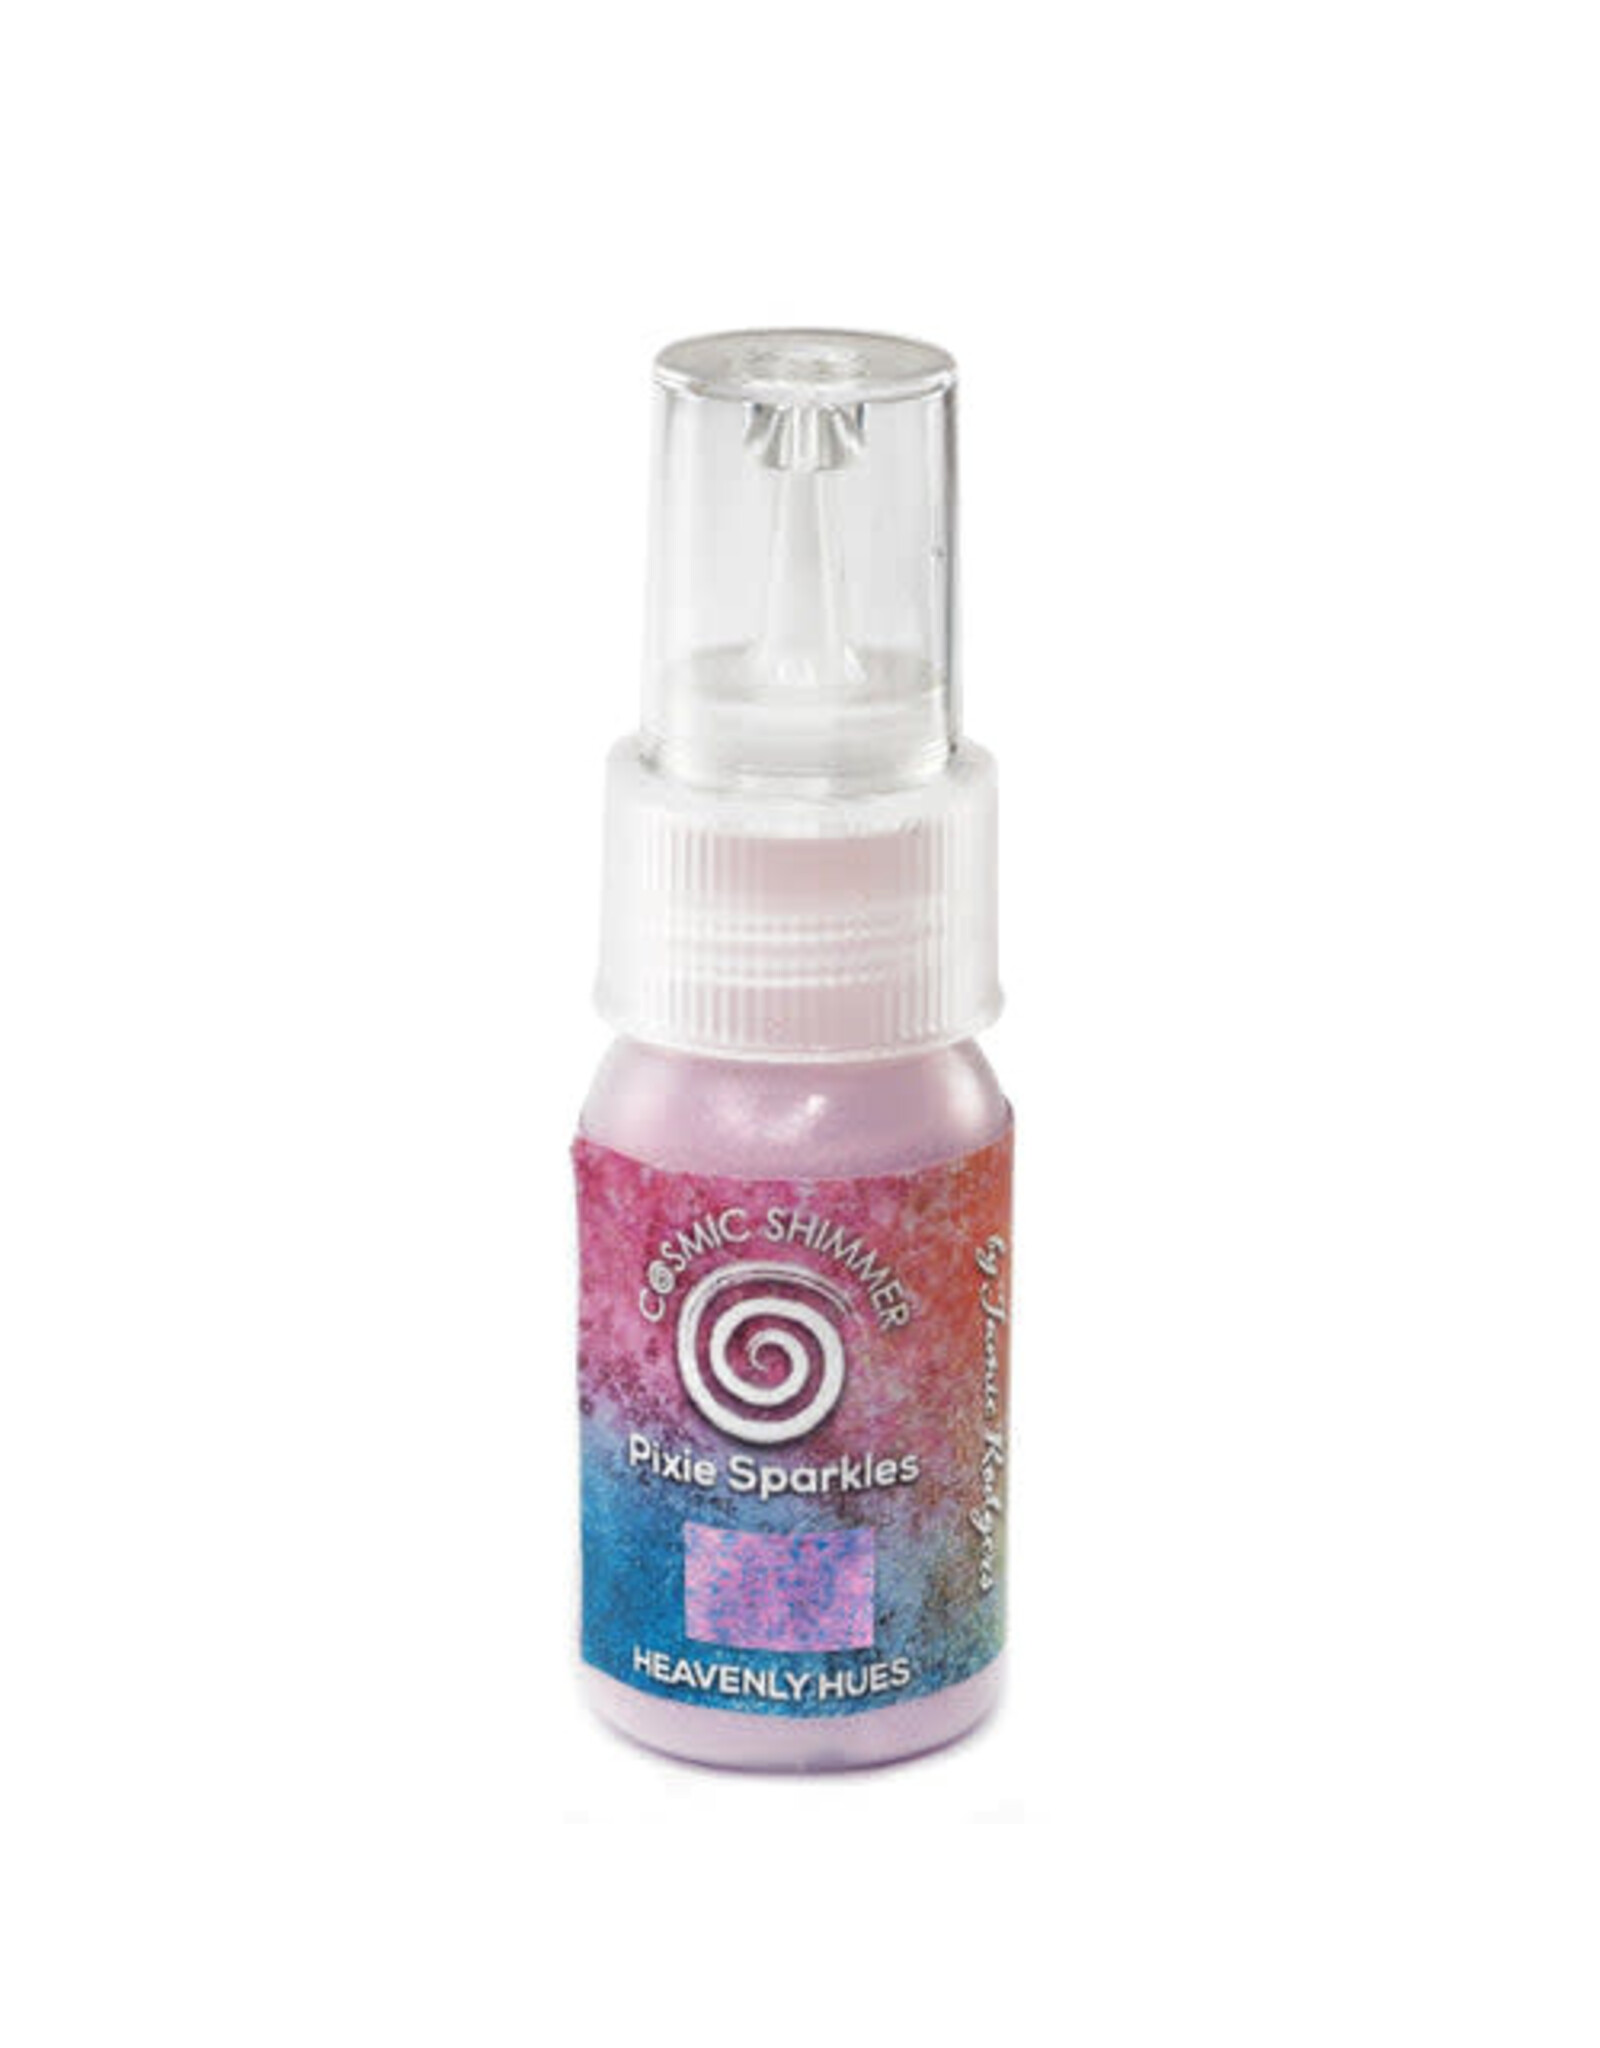 CREATIVE EXPRESSIONS COSMIC SHIMMER JAMIE RODGERS HEAVENLY HUES PIXIE SPARKLES 30ML